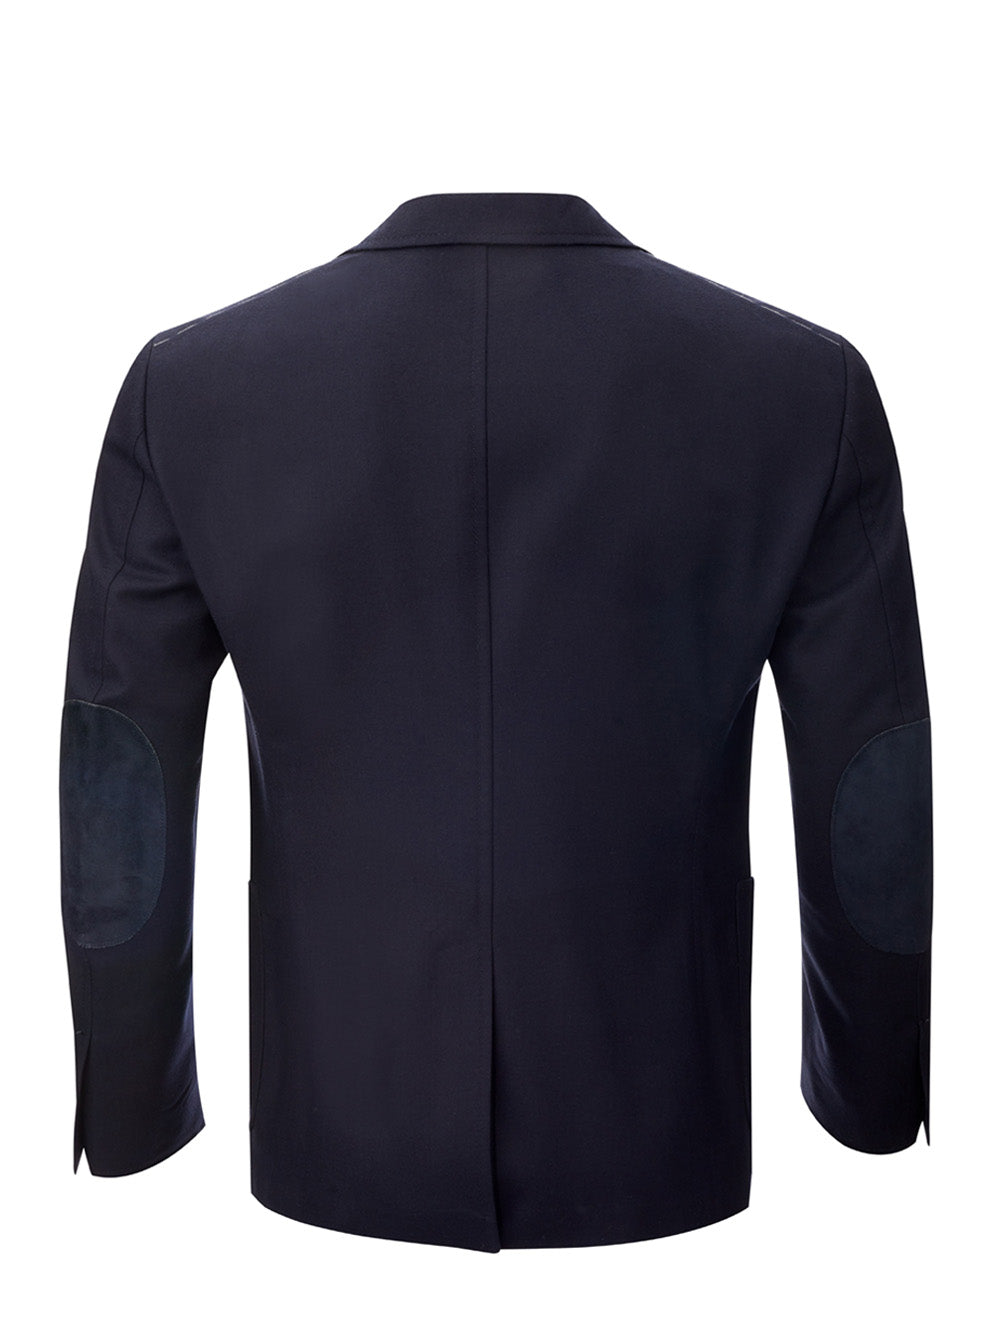 Tom Ford Wool Two Buttons Blue Jacket